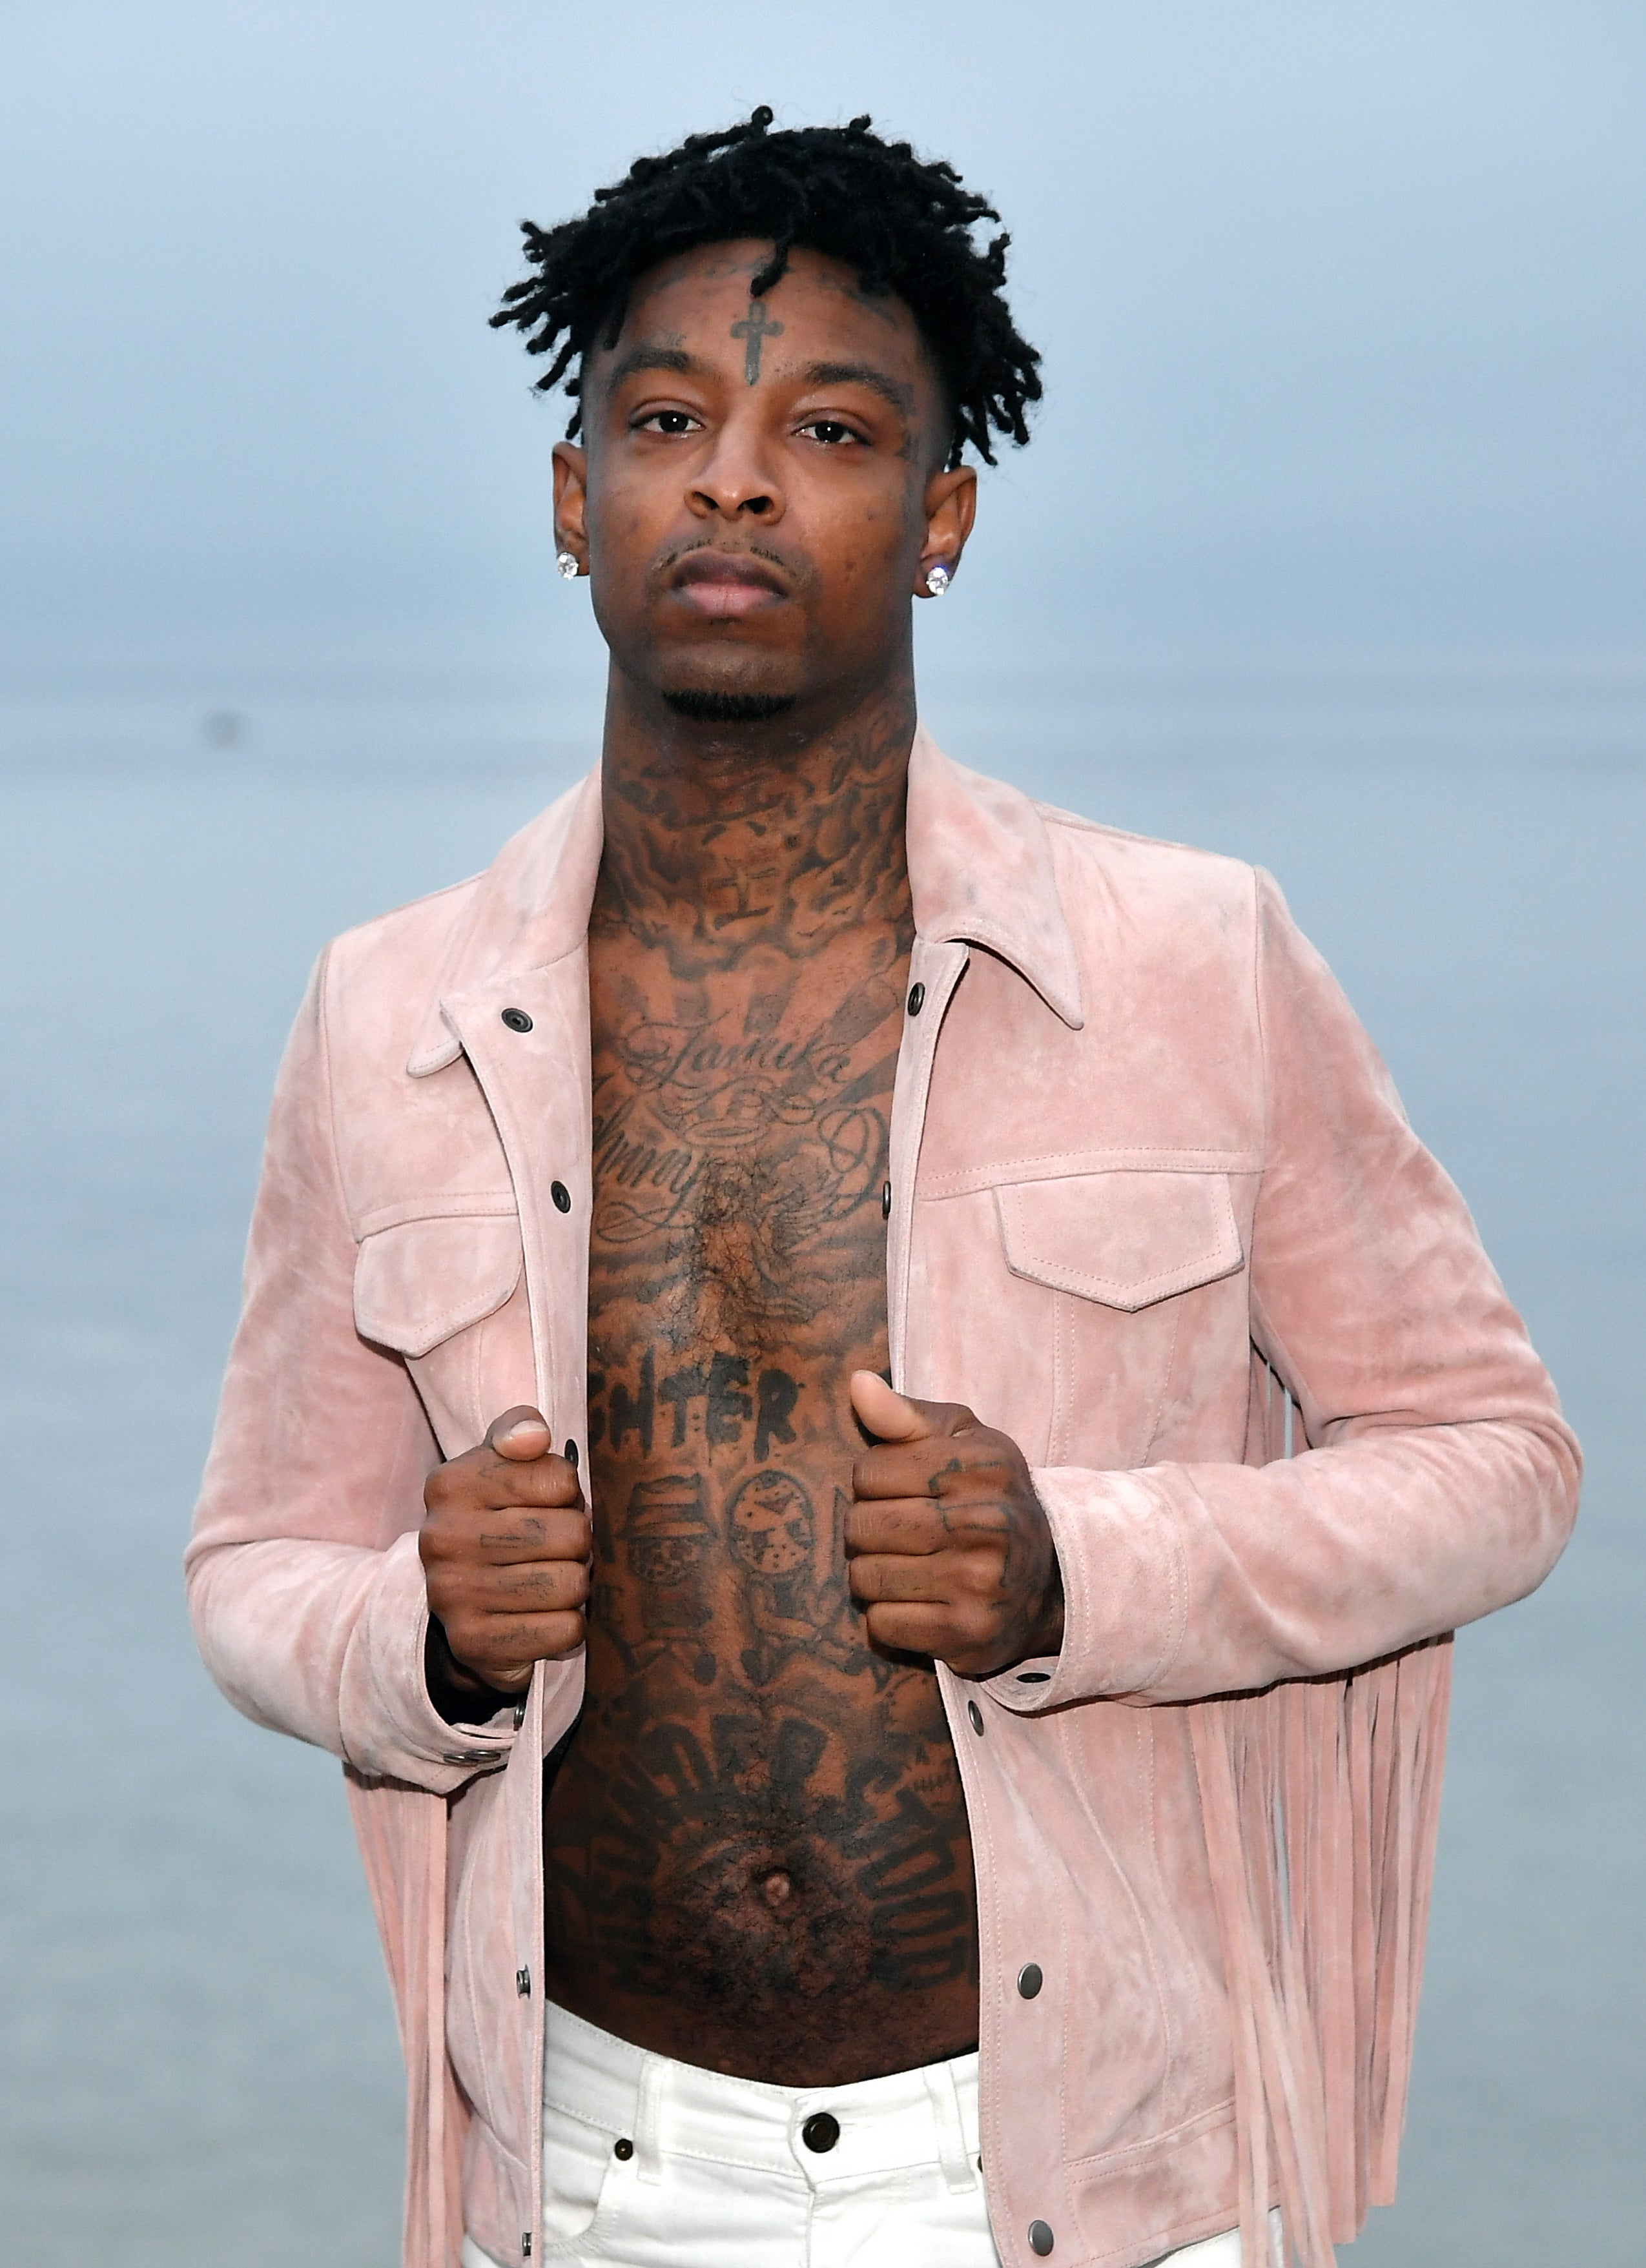 Rapper 21 Savage released a single titled ‘ASMR’ in 2018